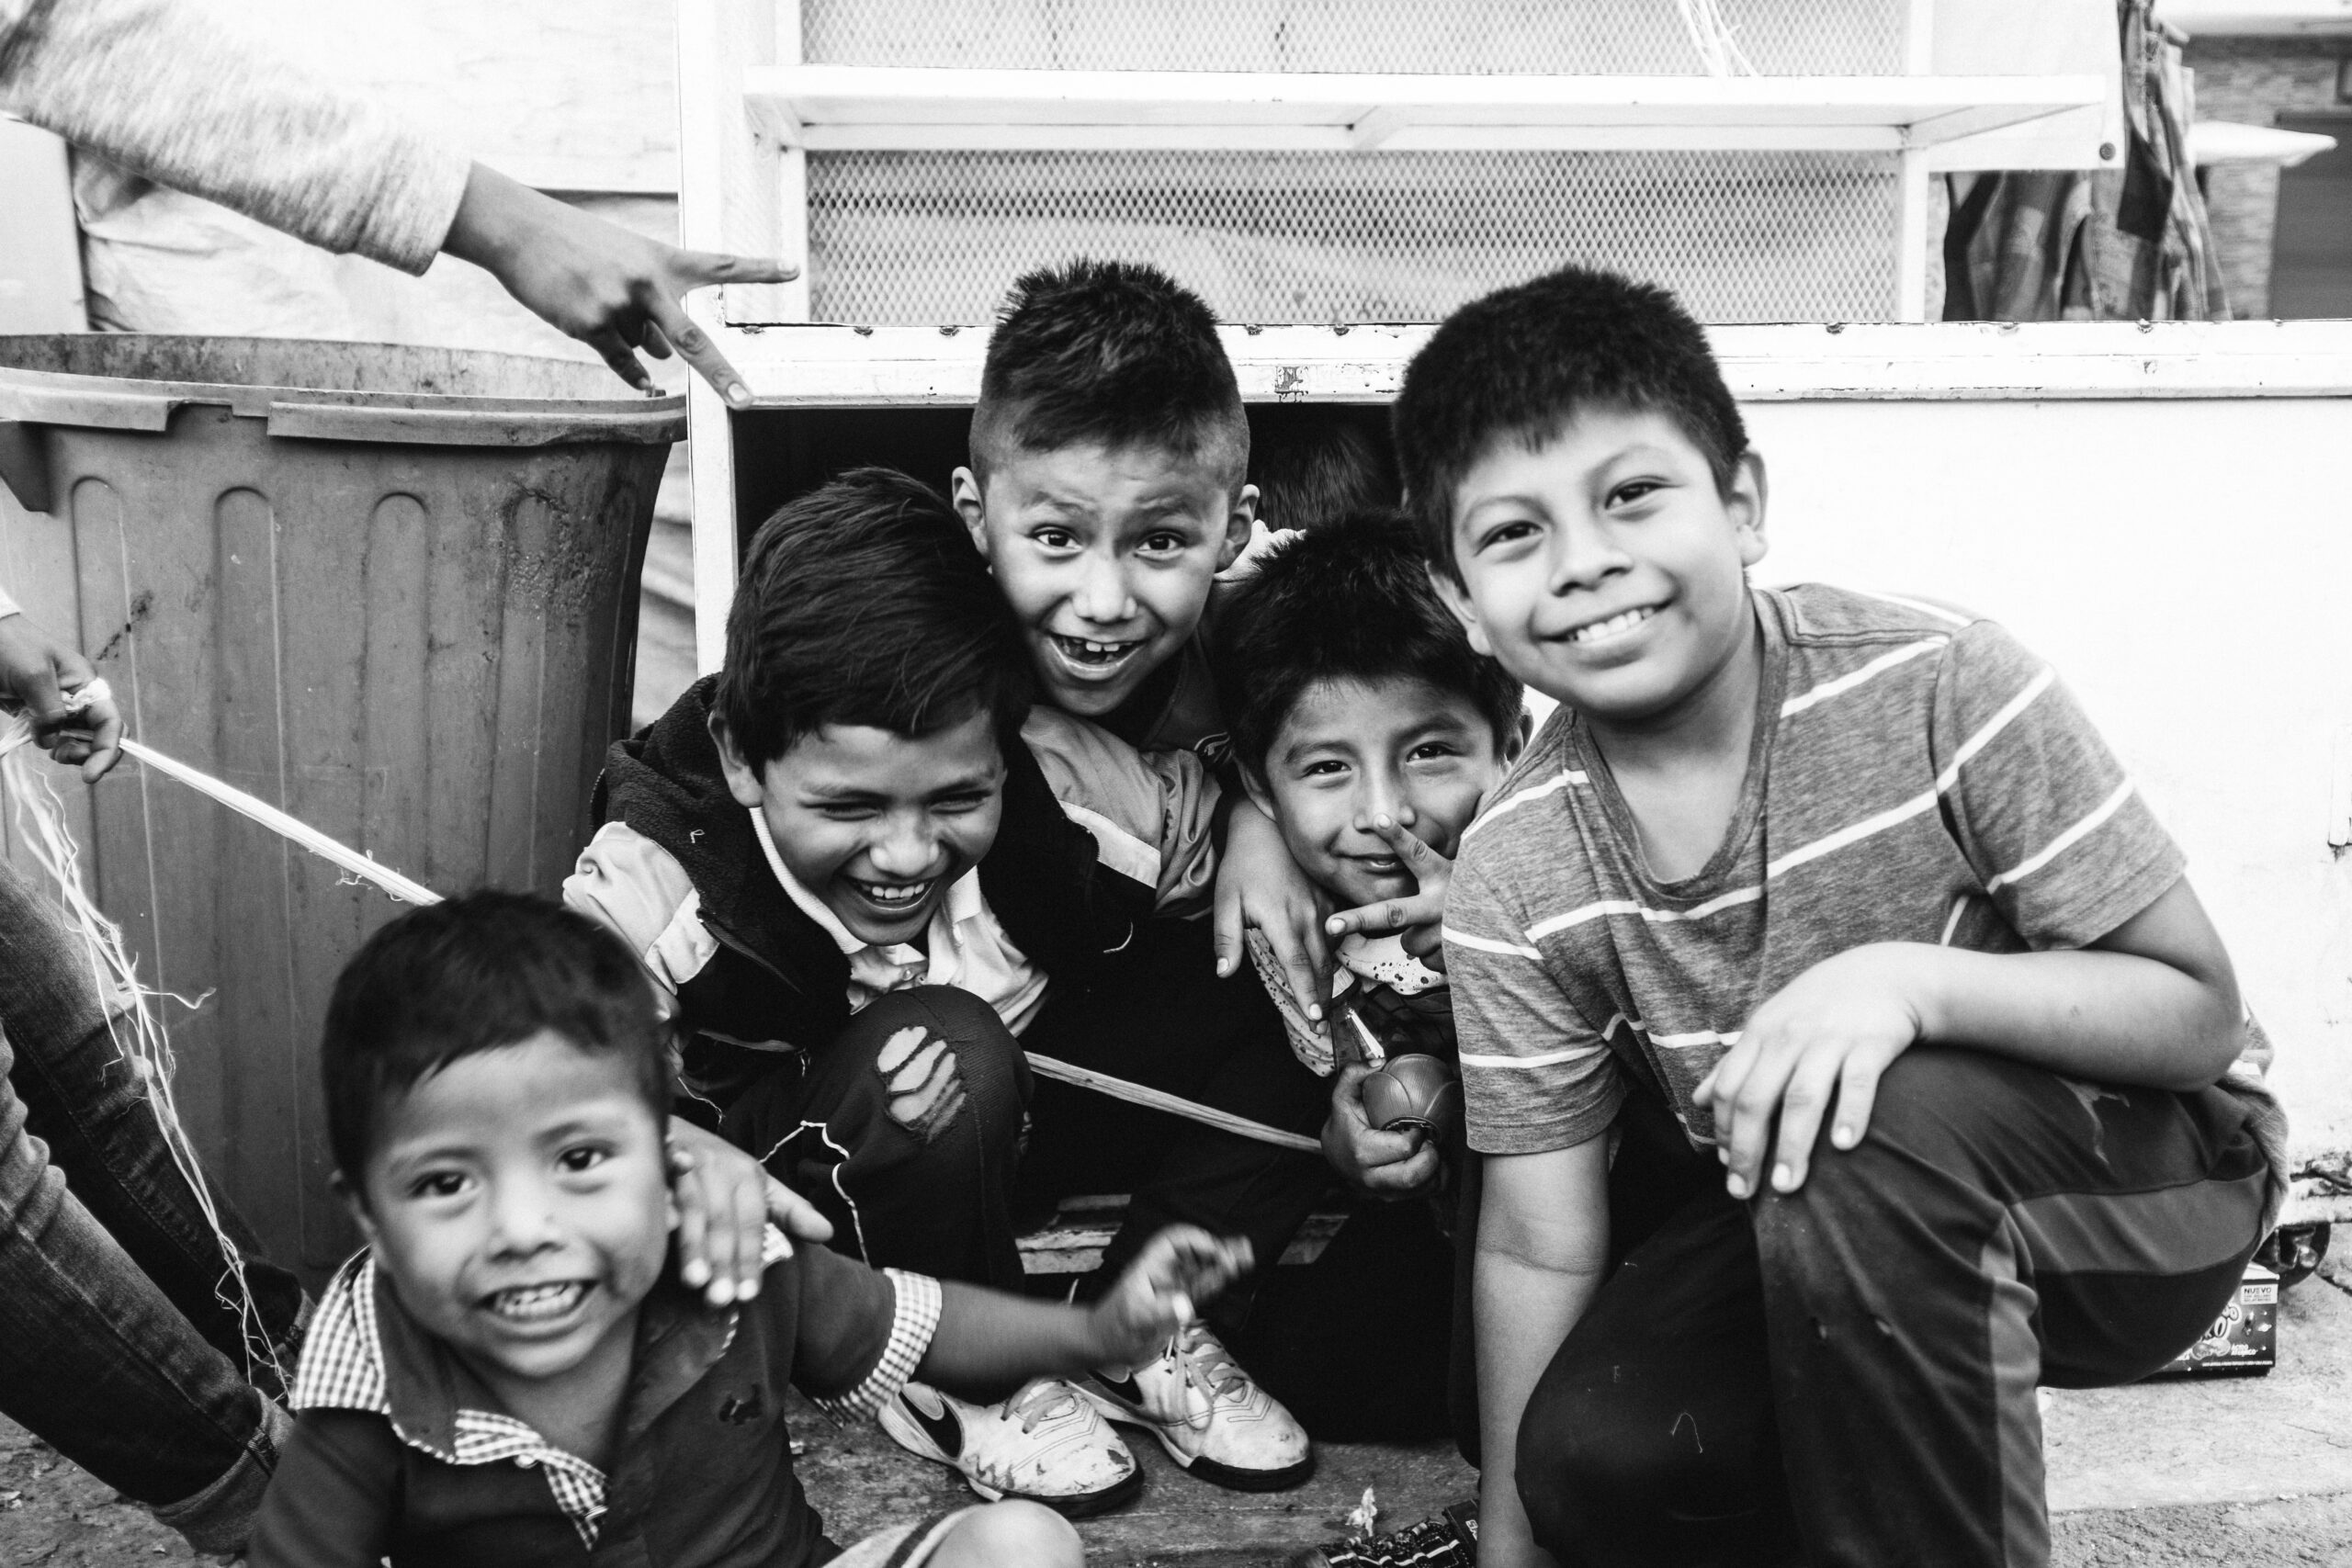 Black and white photo of a group of kids, smiling at the camera.